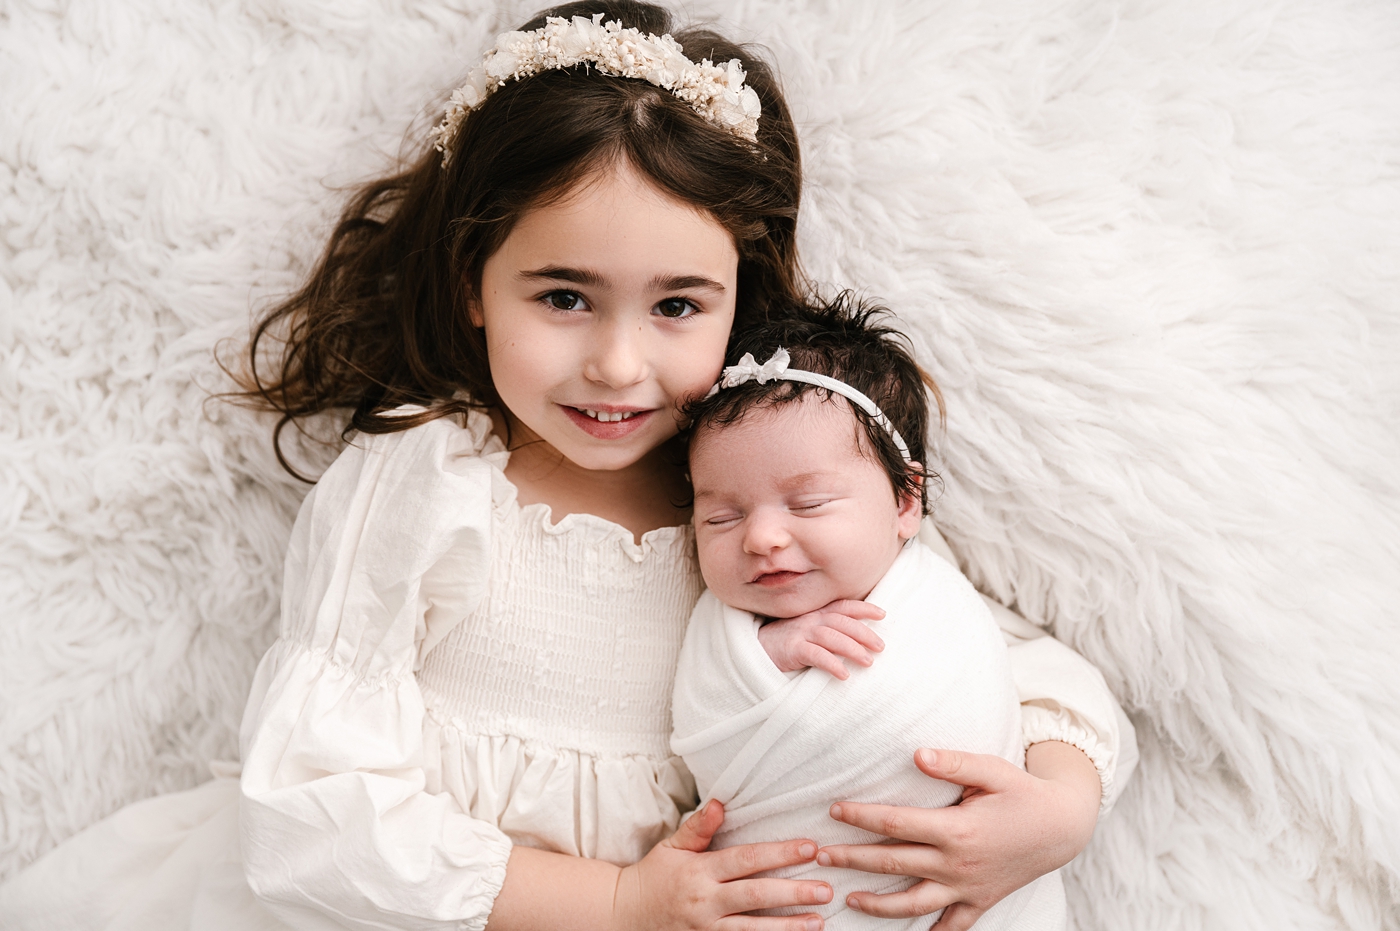 Big sister holds newborn baby sister during Tacoma newborn session. Image by Meg Newton Photography.